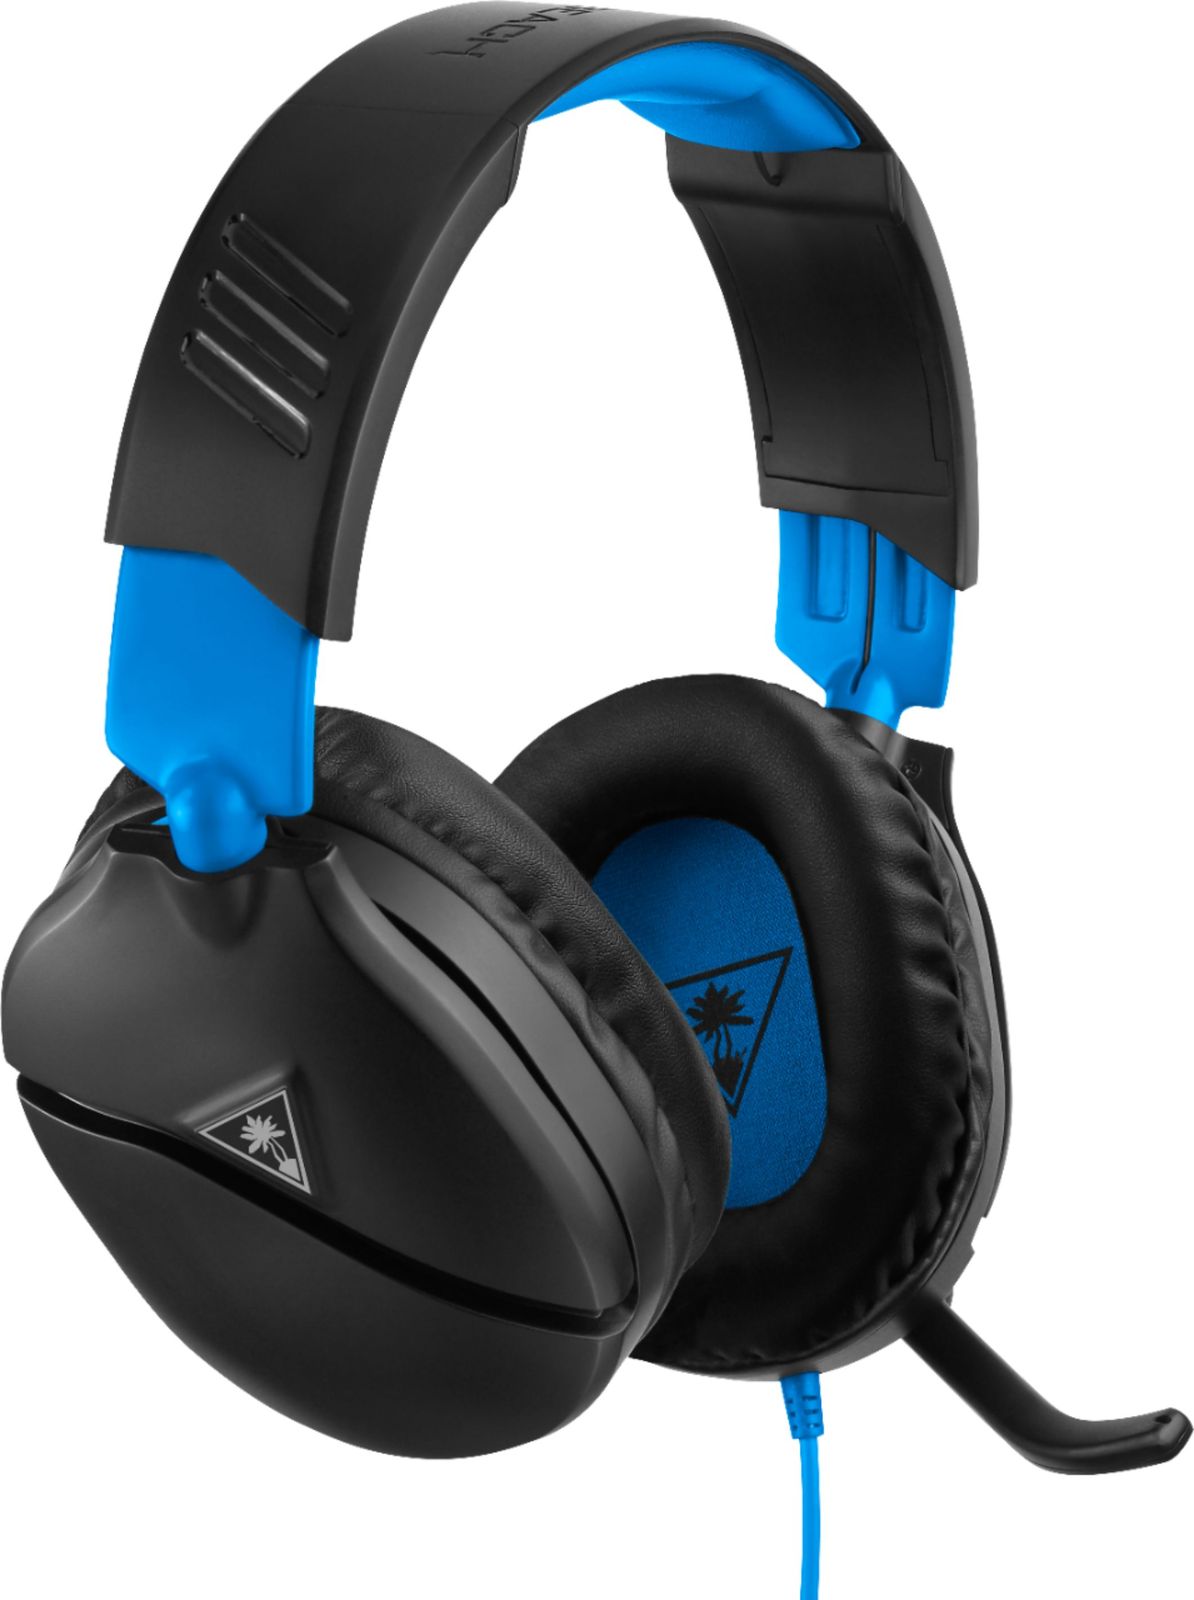 Recon 70 Wired Stereo Gaming Headset For Ps4 Pro,